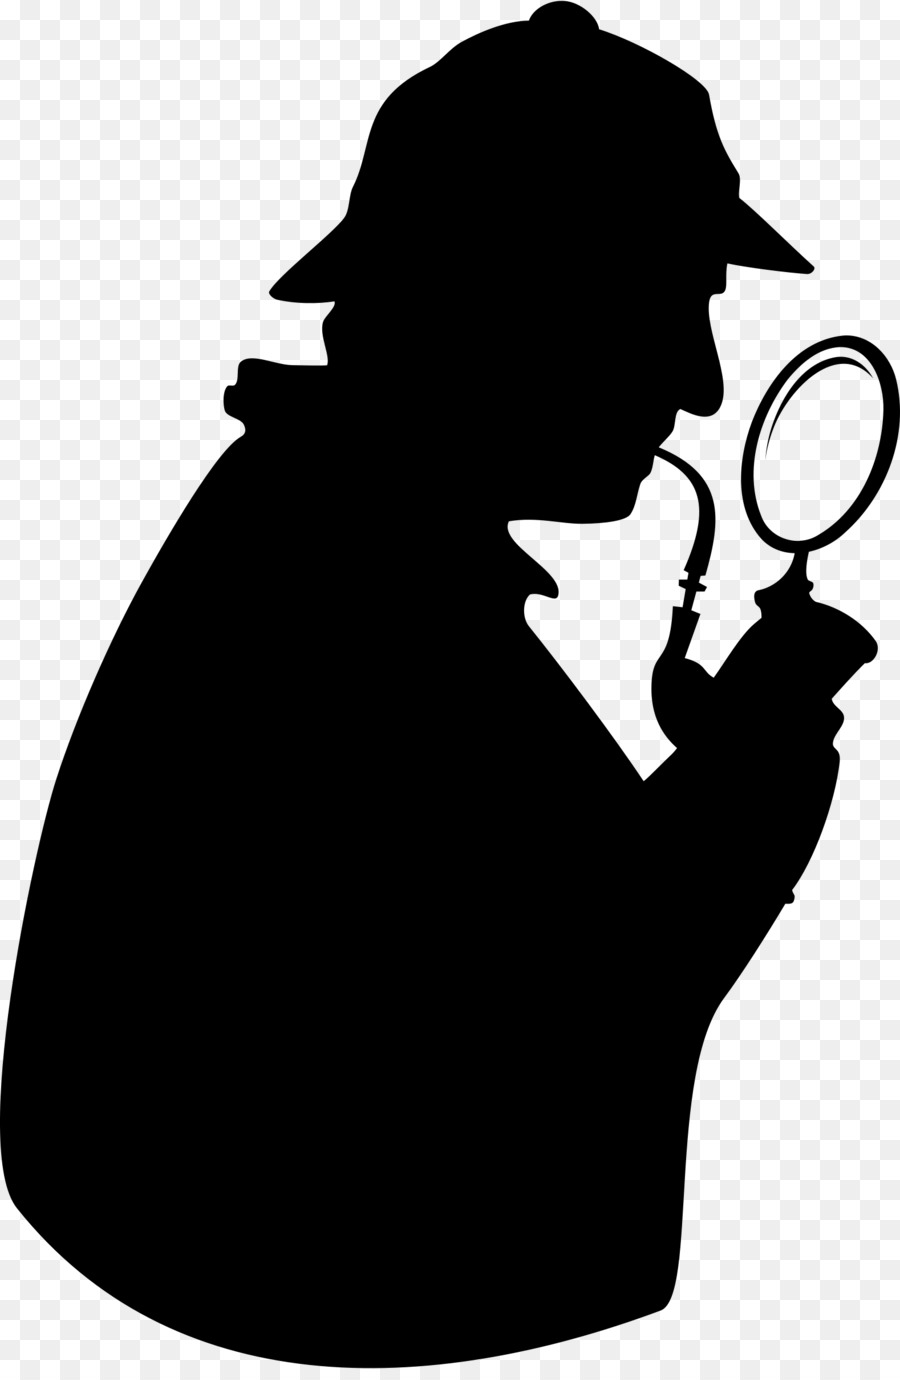 Sherlock Holmes Doctor Watson Silhouette Clip art - Magnifying Glass png download - 1578*2400 - Free Transparent Sherlock Holmes png Download.